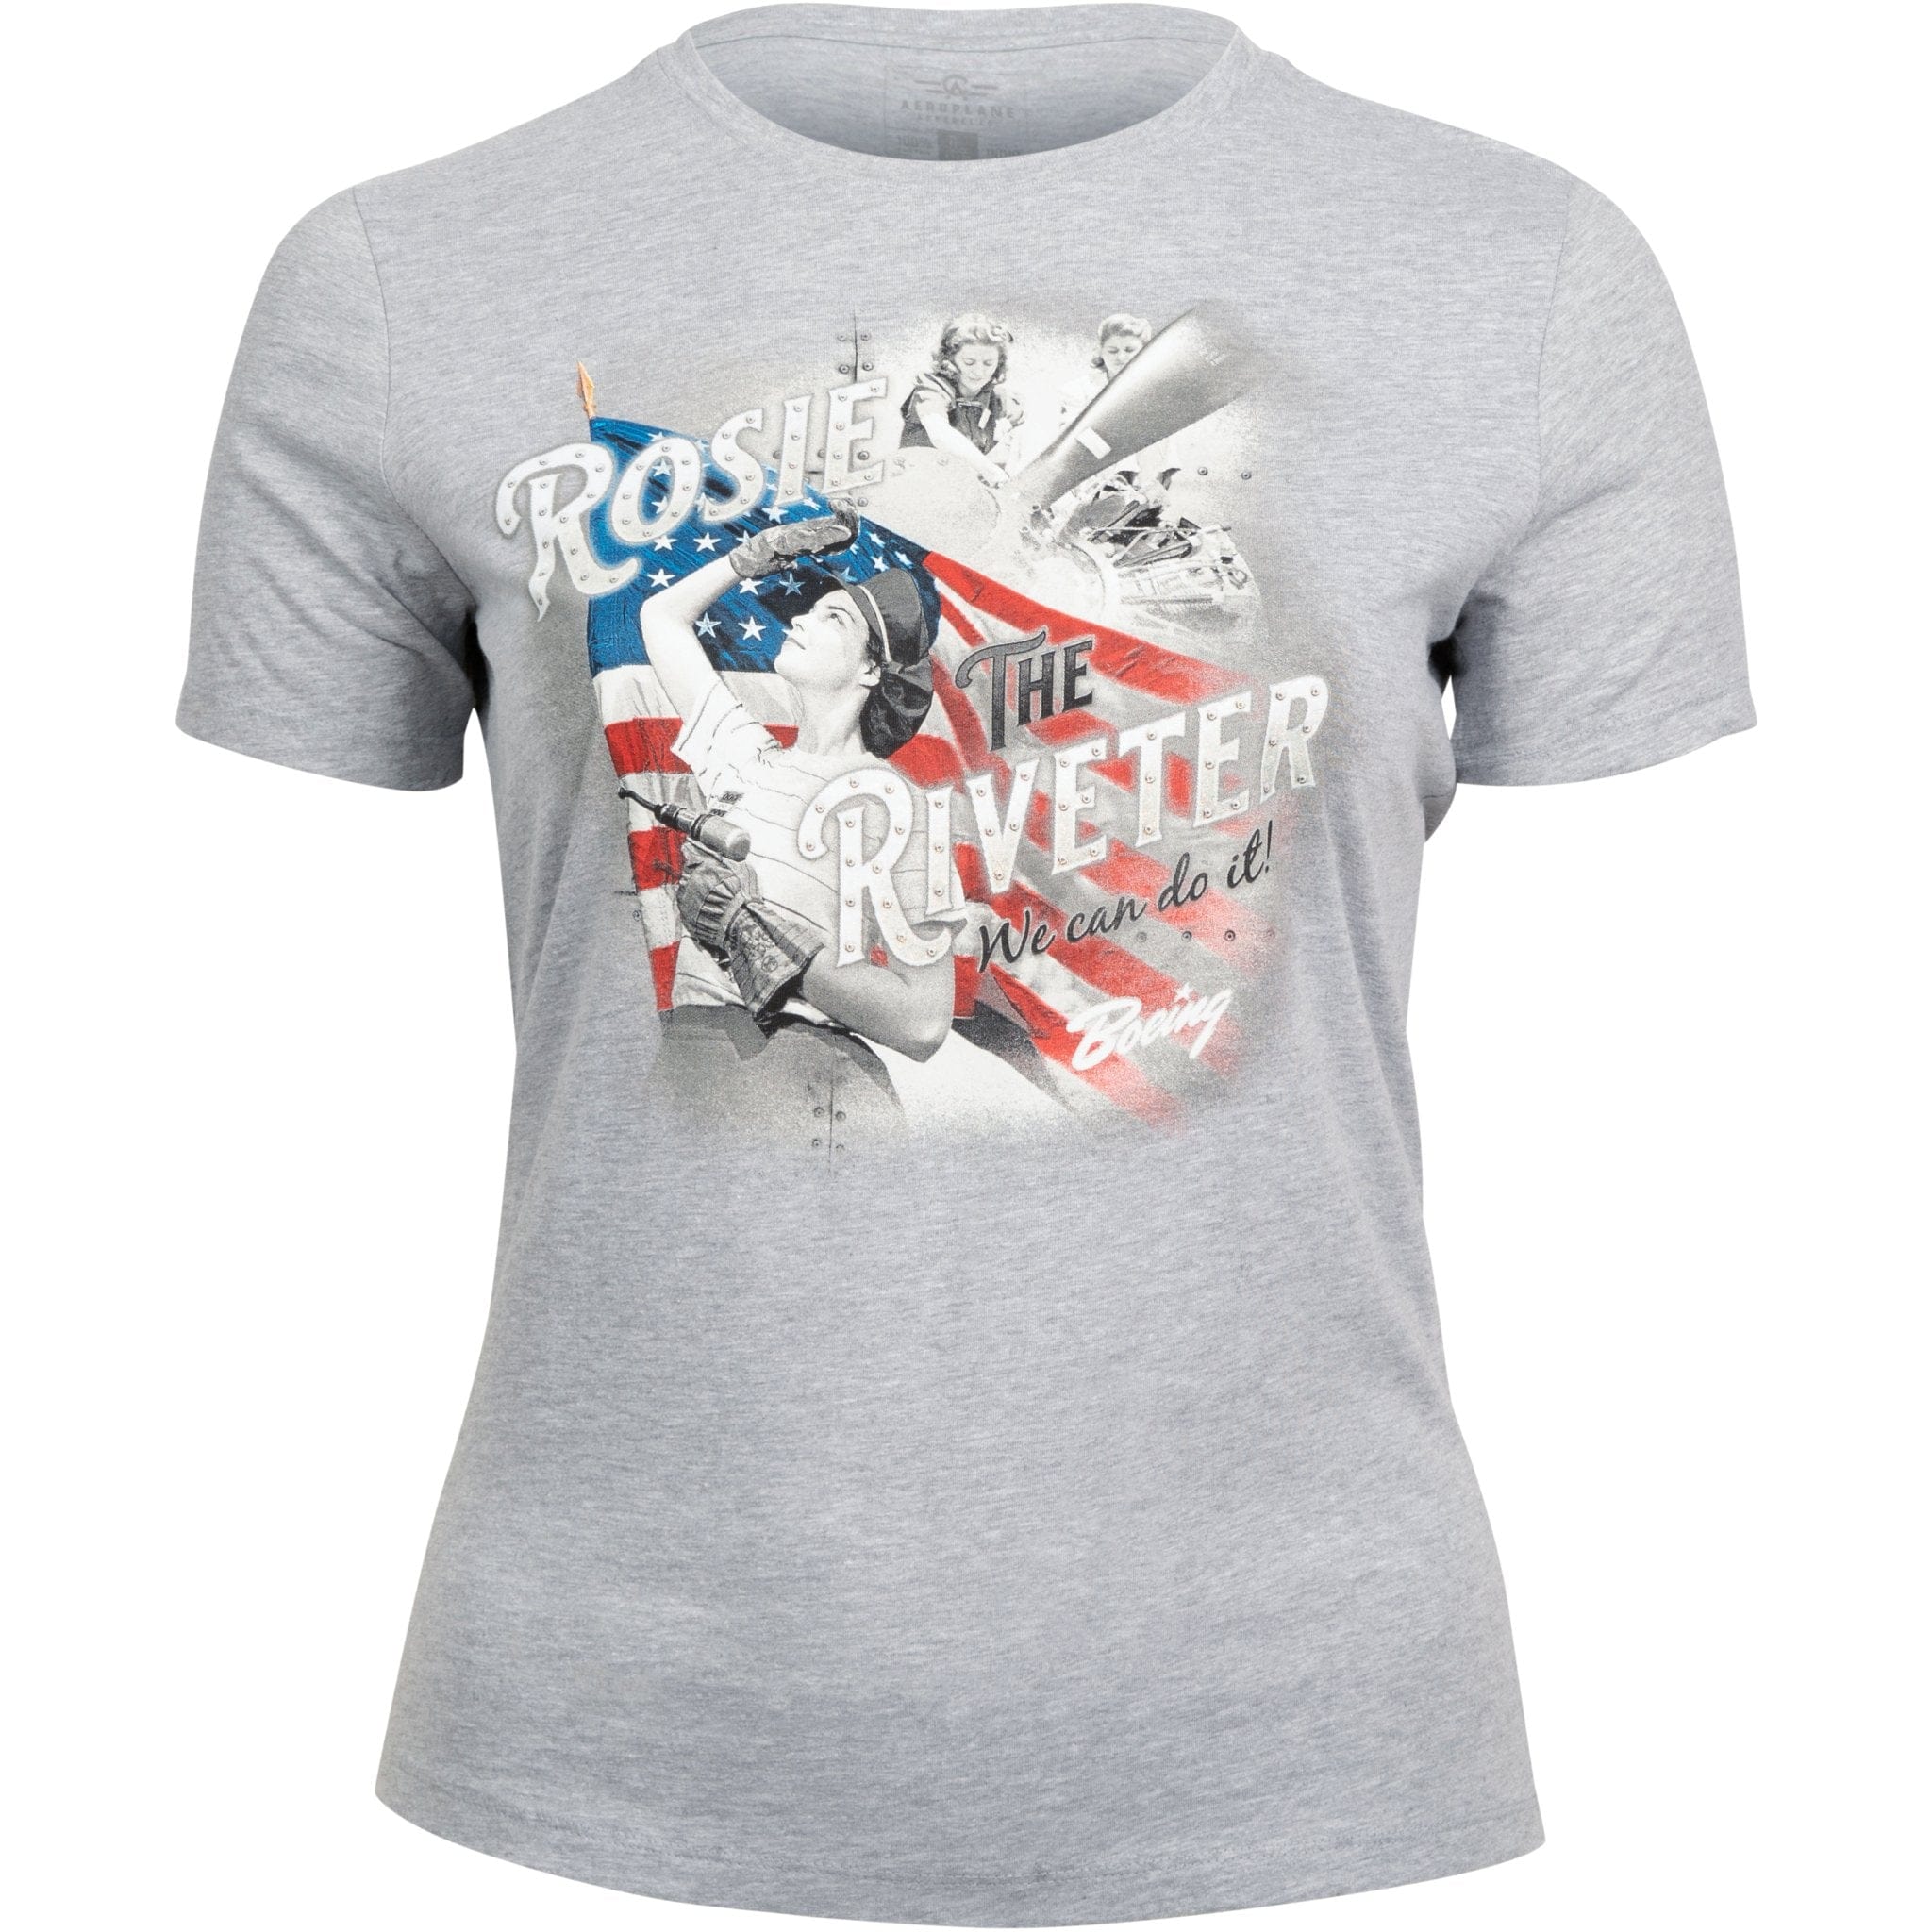 Rosie the Riveter Officially Licensed Aeroplane Apparel Co. Women's T-Shirt